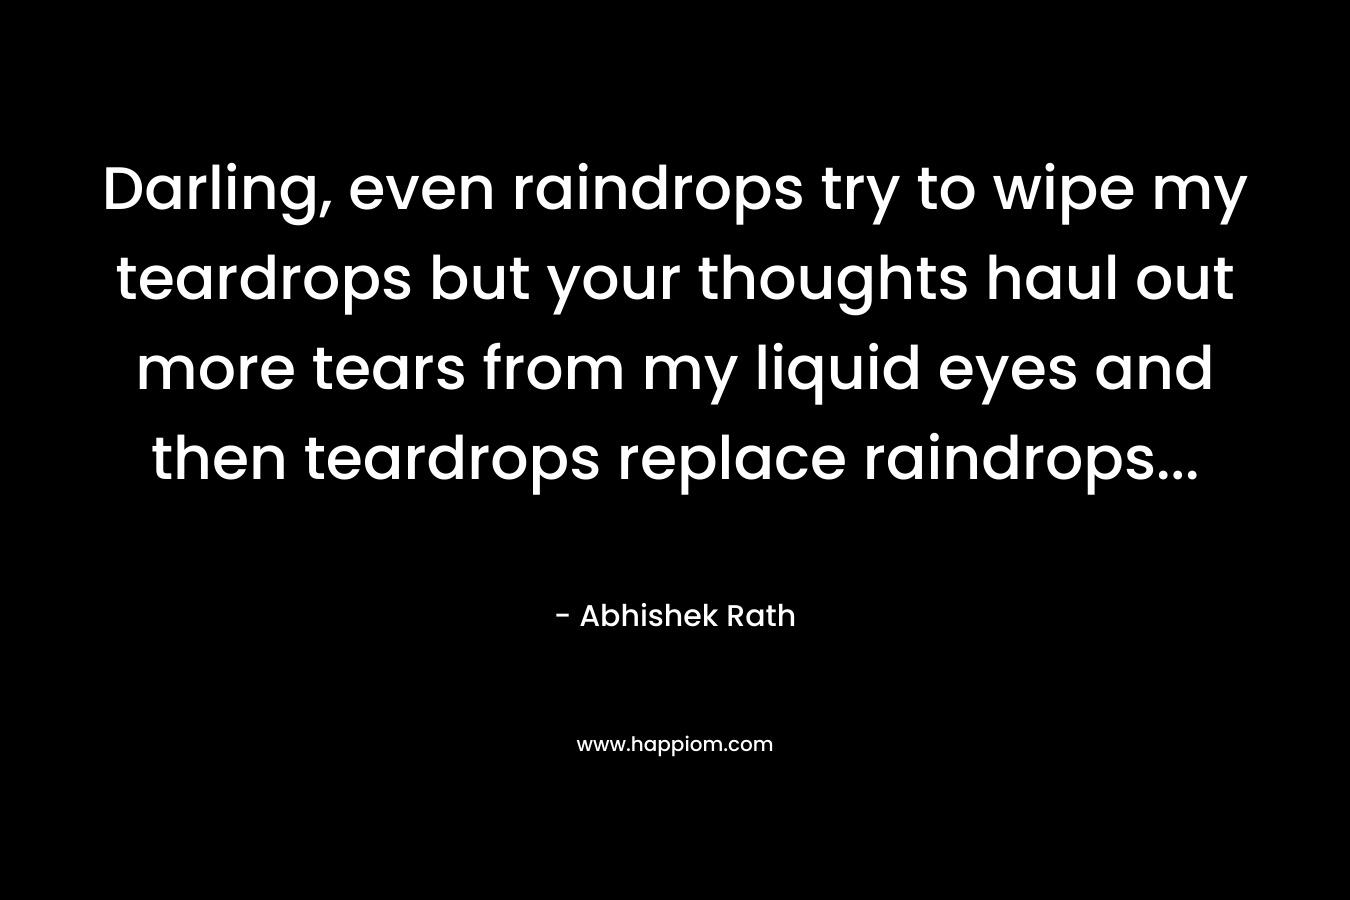 Darling, even raindrops try to wipe my teardrops but your thoughts haul out more tears from my liquid eyes and then teardrops replace raindrops… – Abhishek Rath